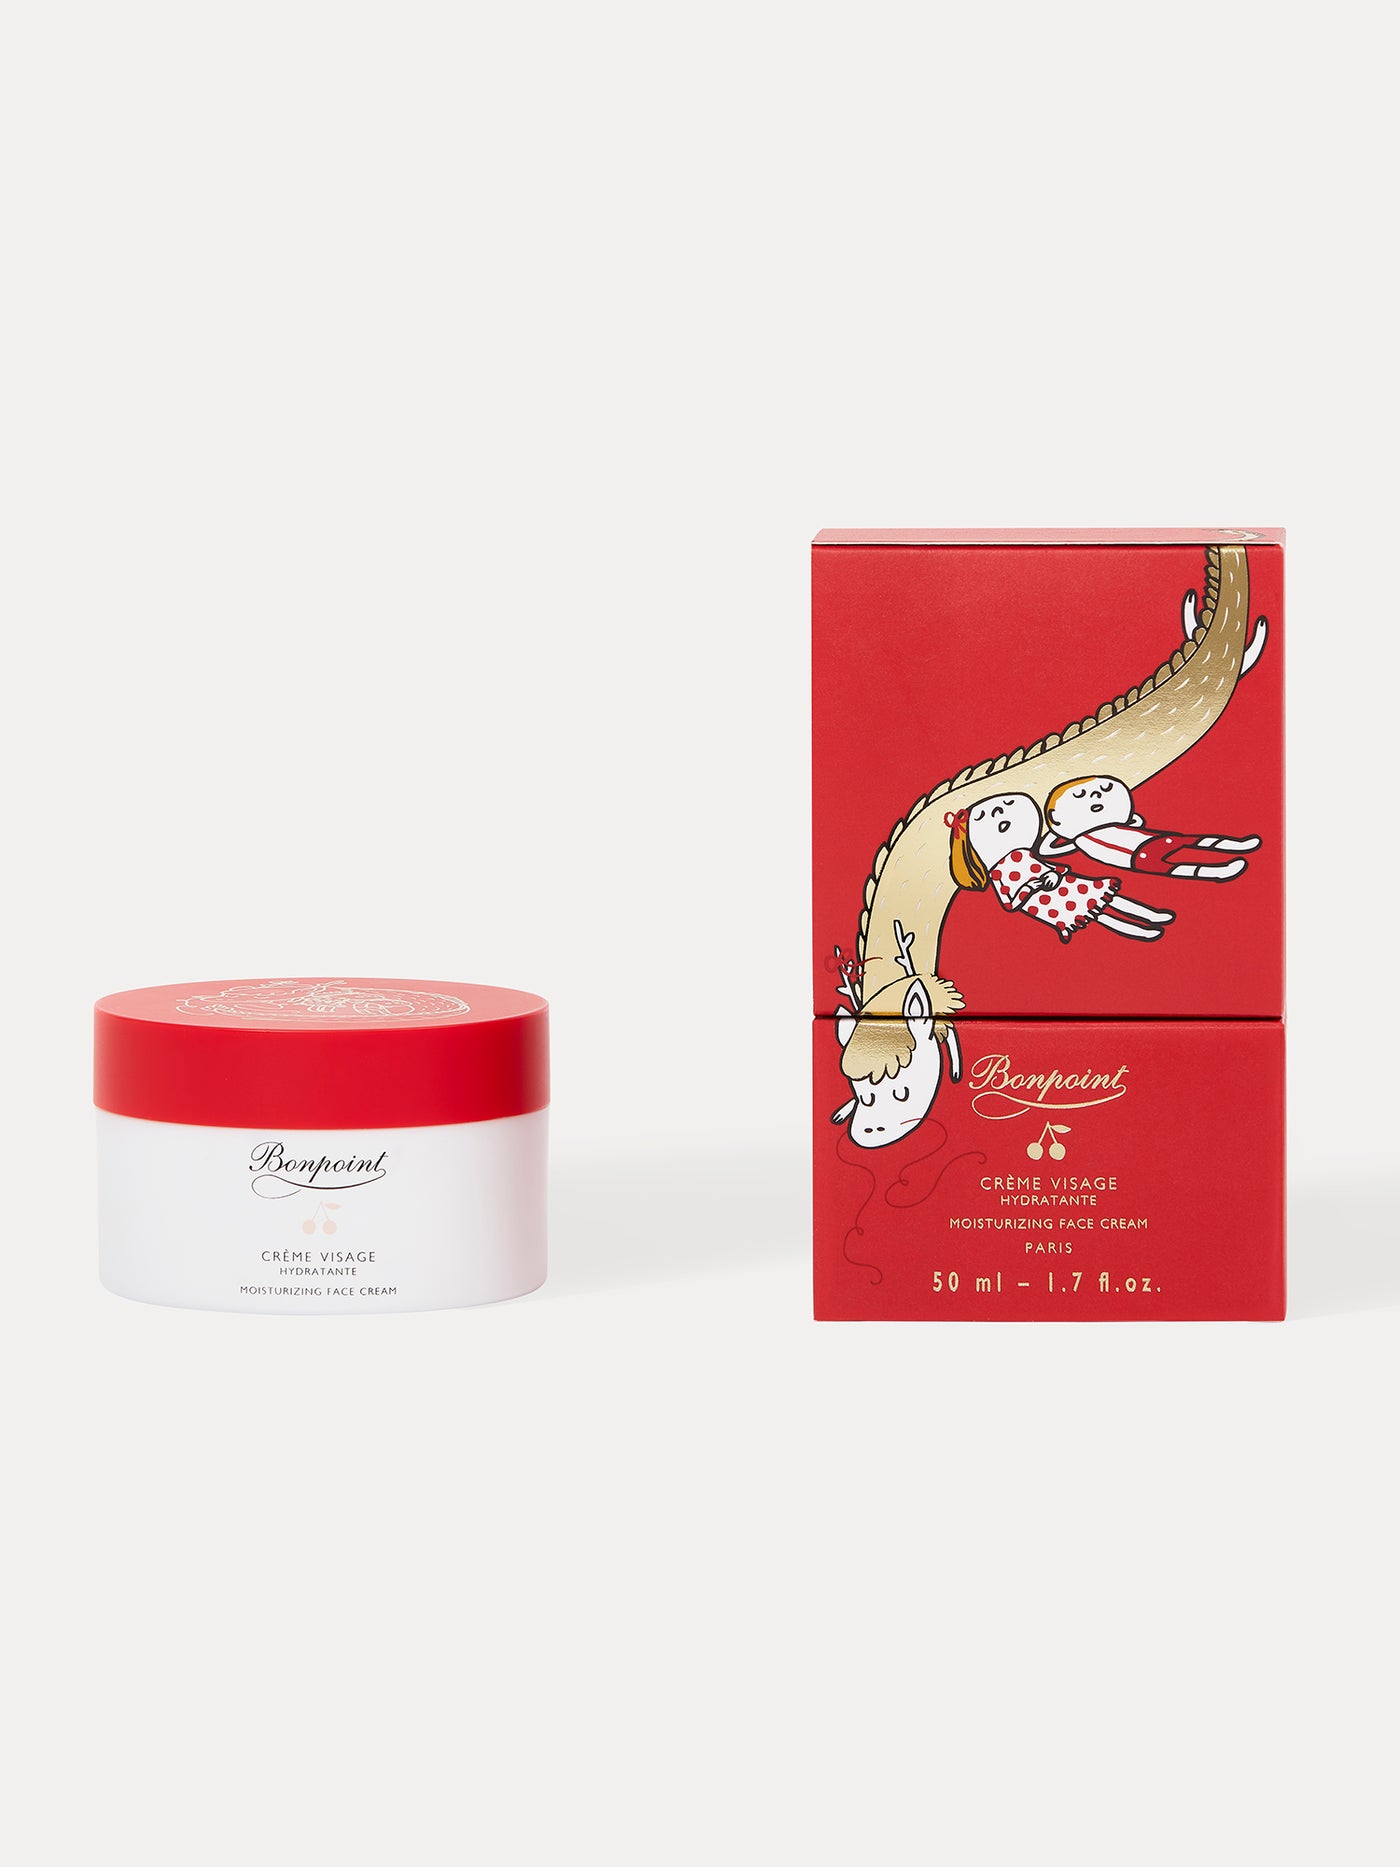 Moisturizing Face cream "Lucky dragon" in limited edition 50 ml